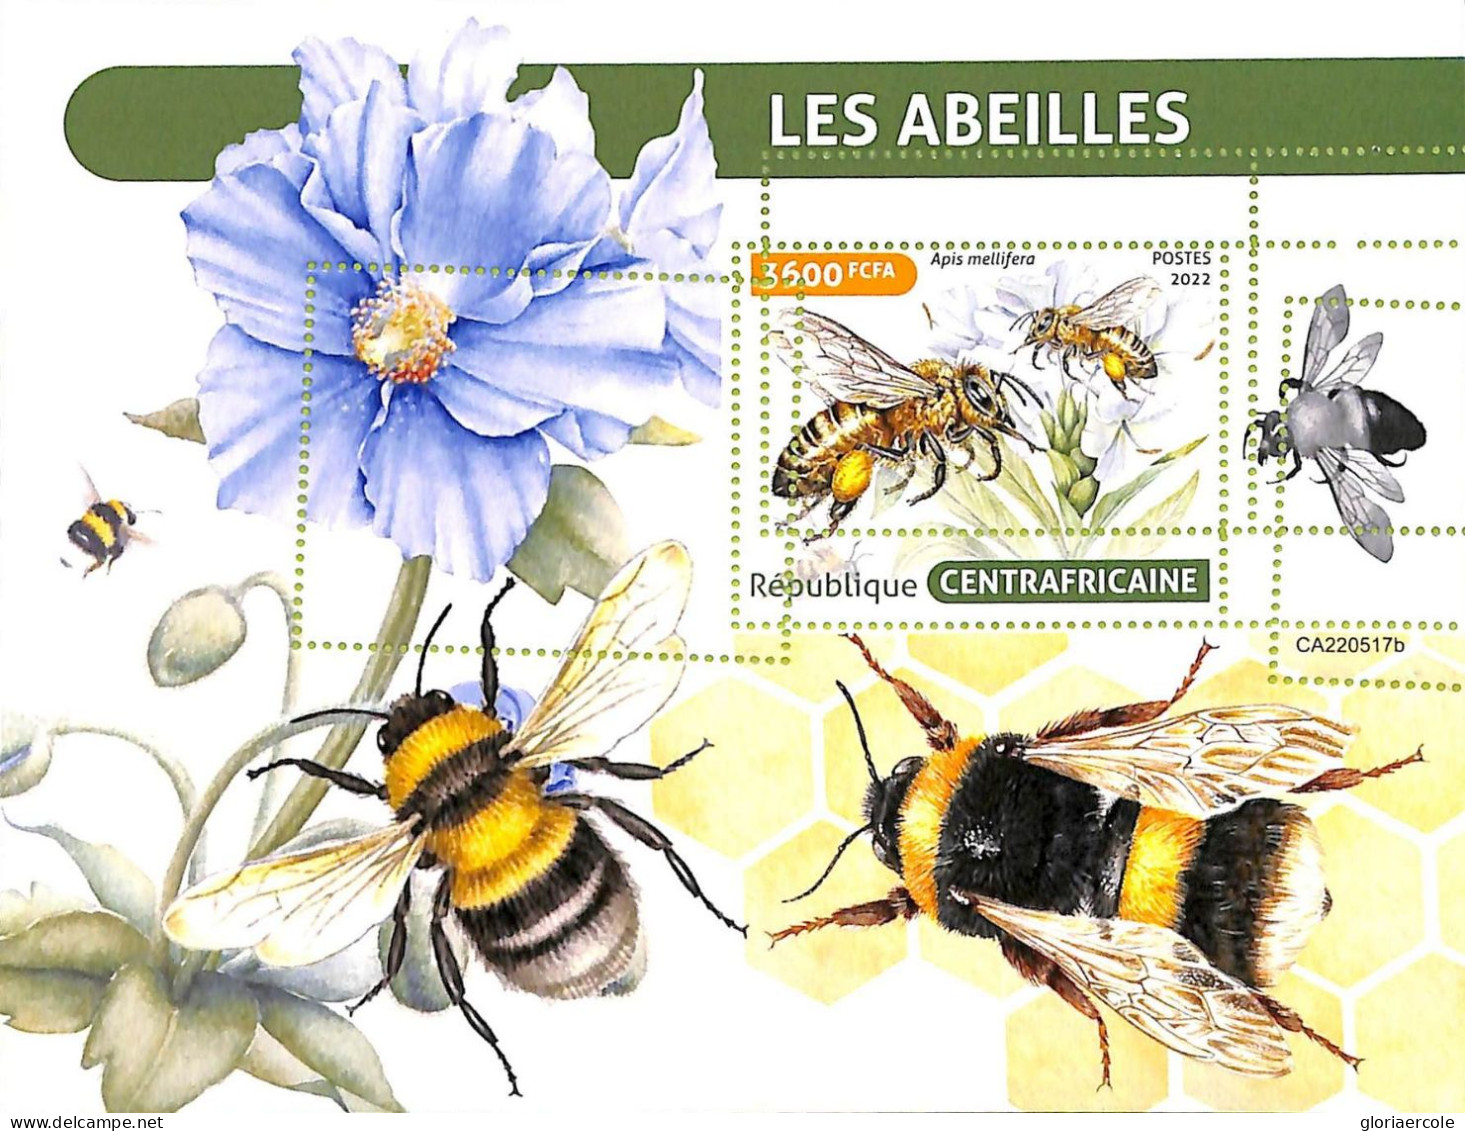 A7343 - CENTRAFRICAINE - ERROR MISPERF Stamp Sheet - 2022- Insects -Honeybees - Abeilles